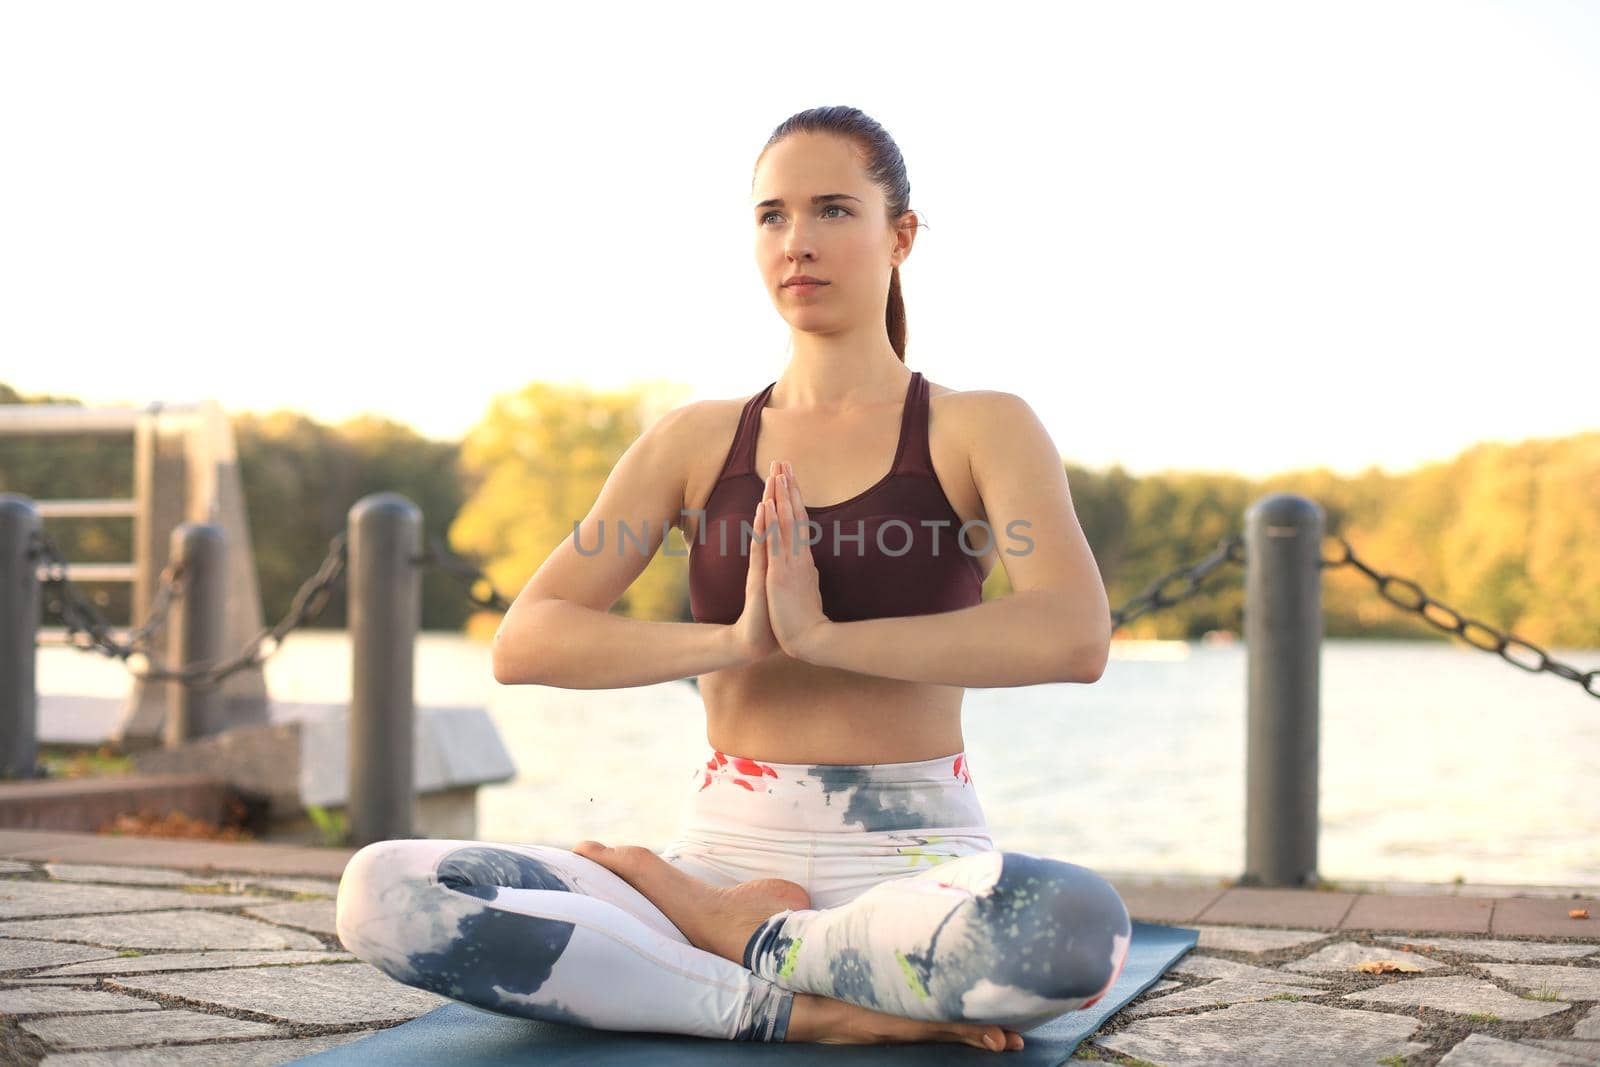 Young pretty woman doing yoga exercises in the park